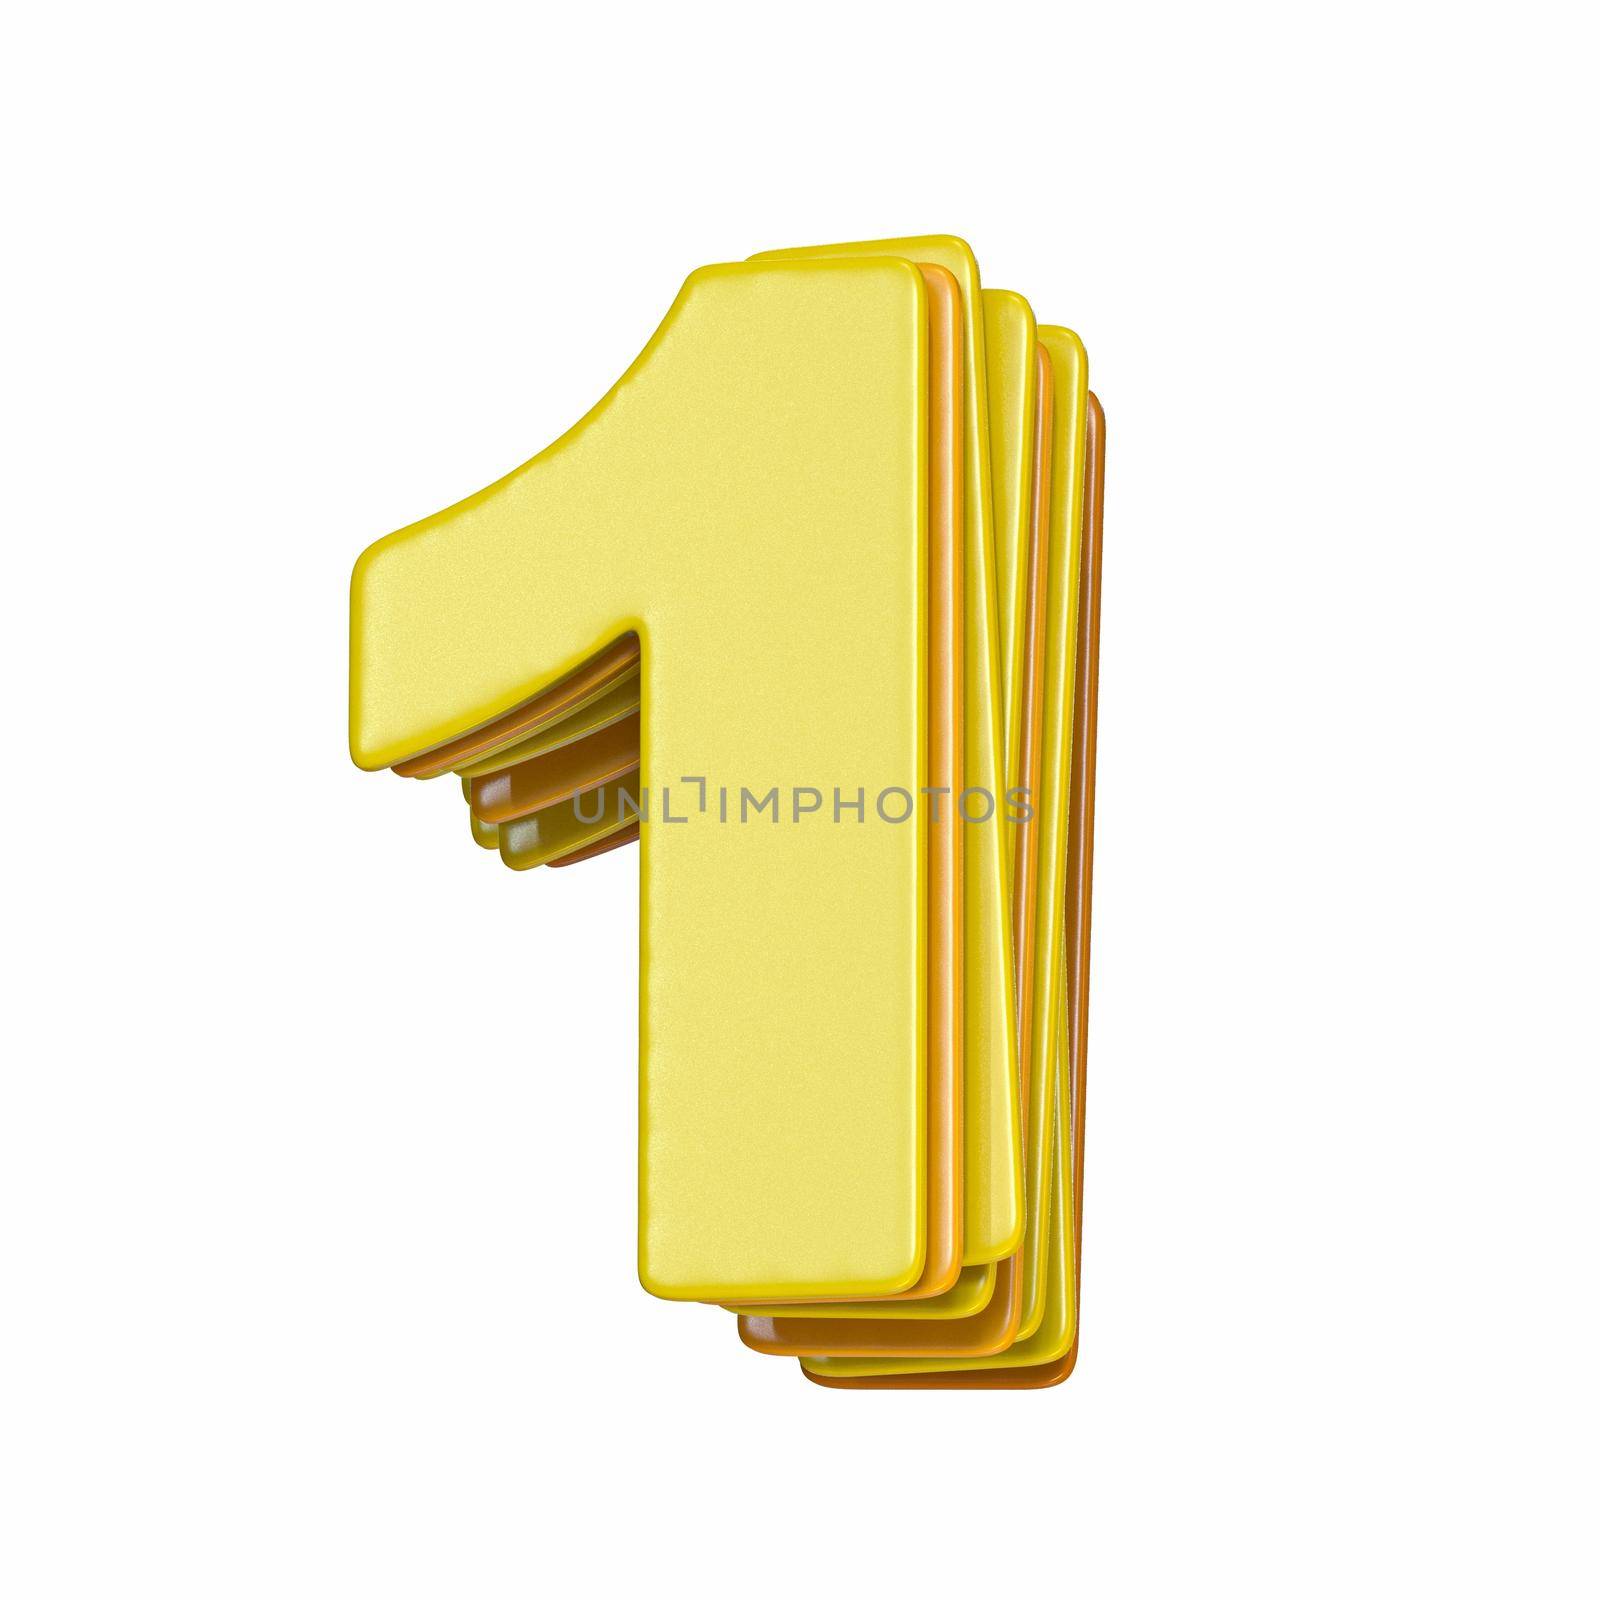 Yellow font Number 1 ONE 3D render illustration isolated on white background